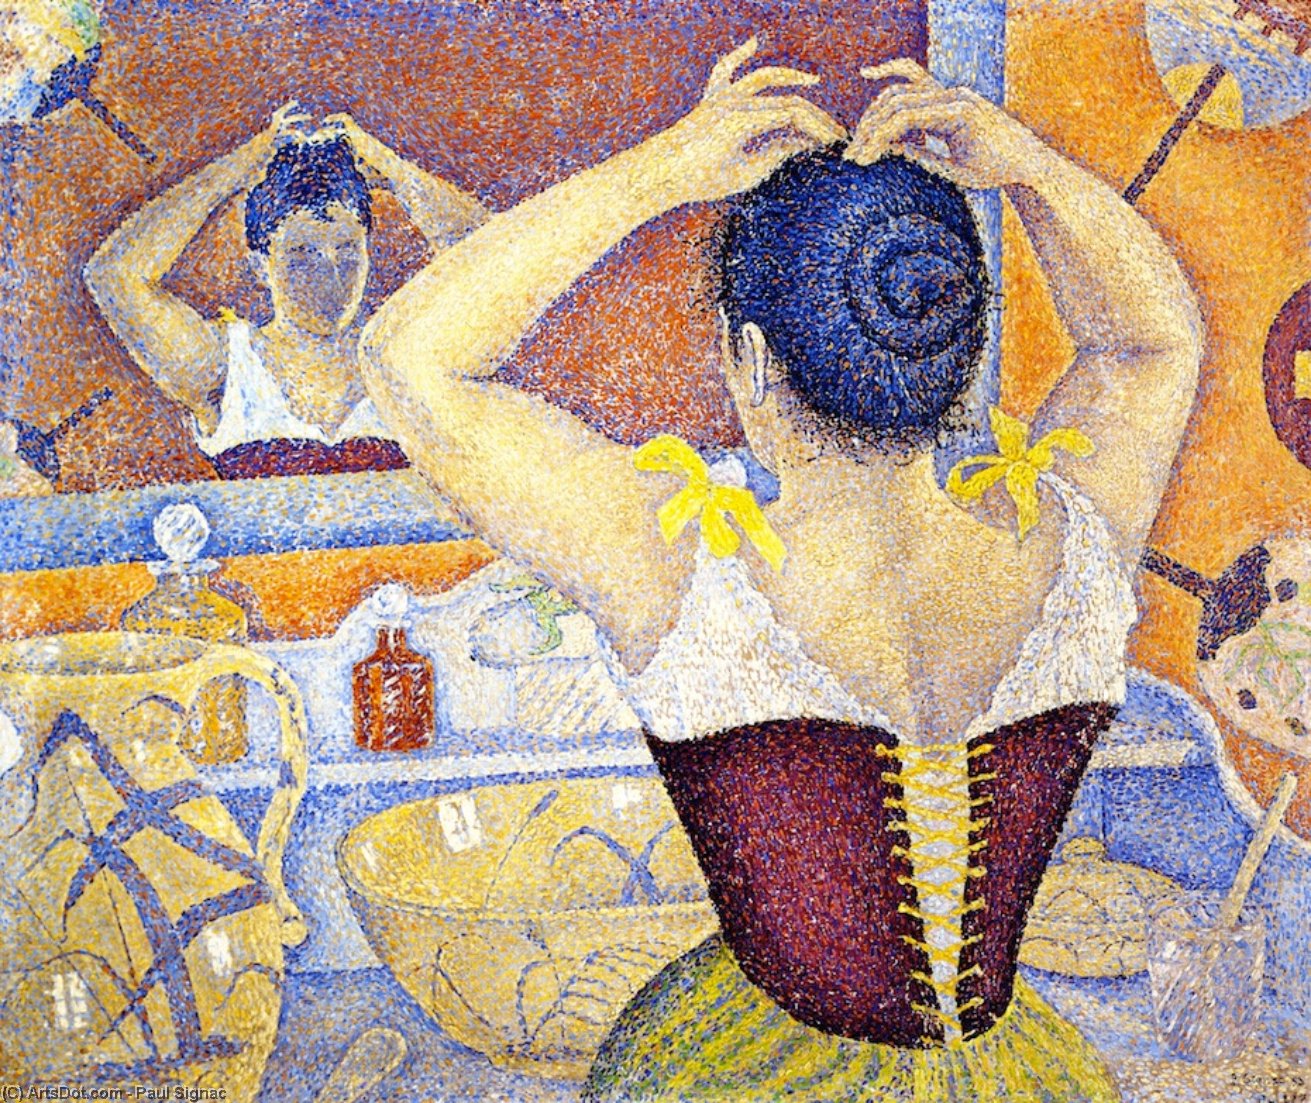 WikiOO.org - Encyclopedia of Fine Arts - Malba, Artwork Paul Signac - Woman Arranging Her Hair, Opus 227 (also known as Arabesques for a Dressing Room)